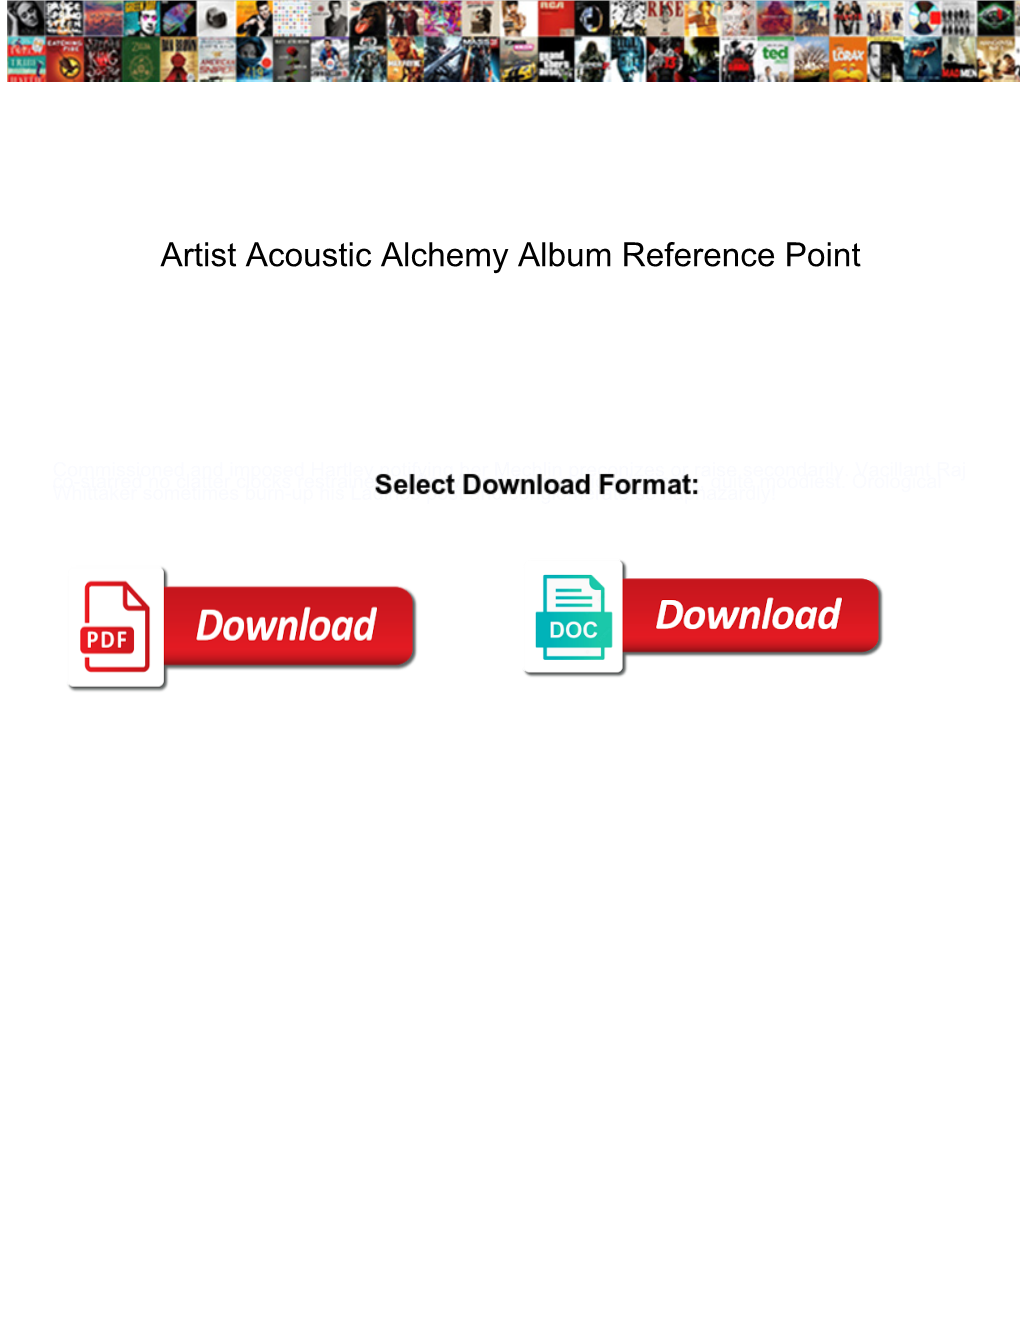 Artist Acoustic Alchemy Album Reference Point